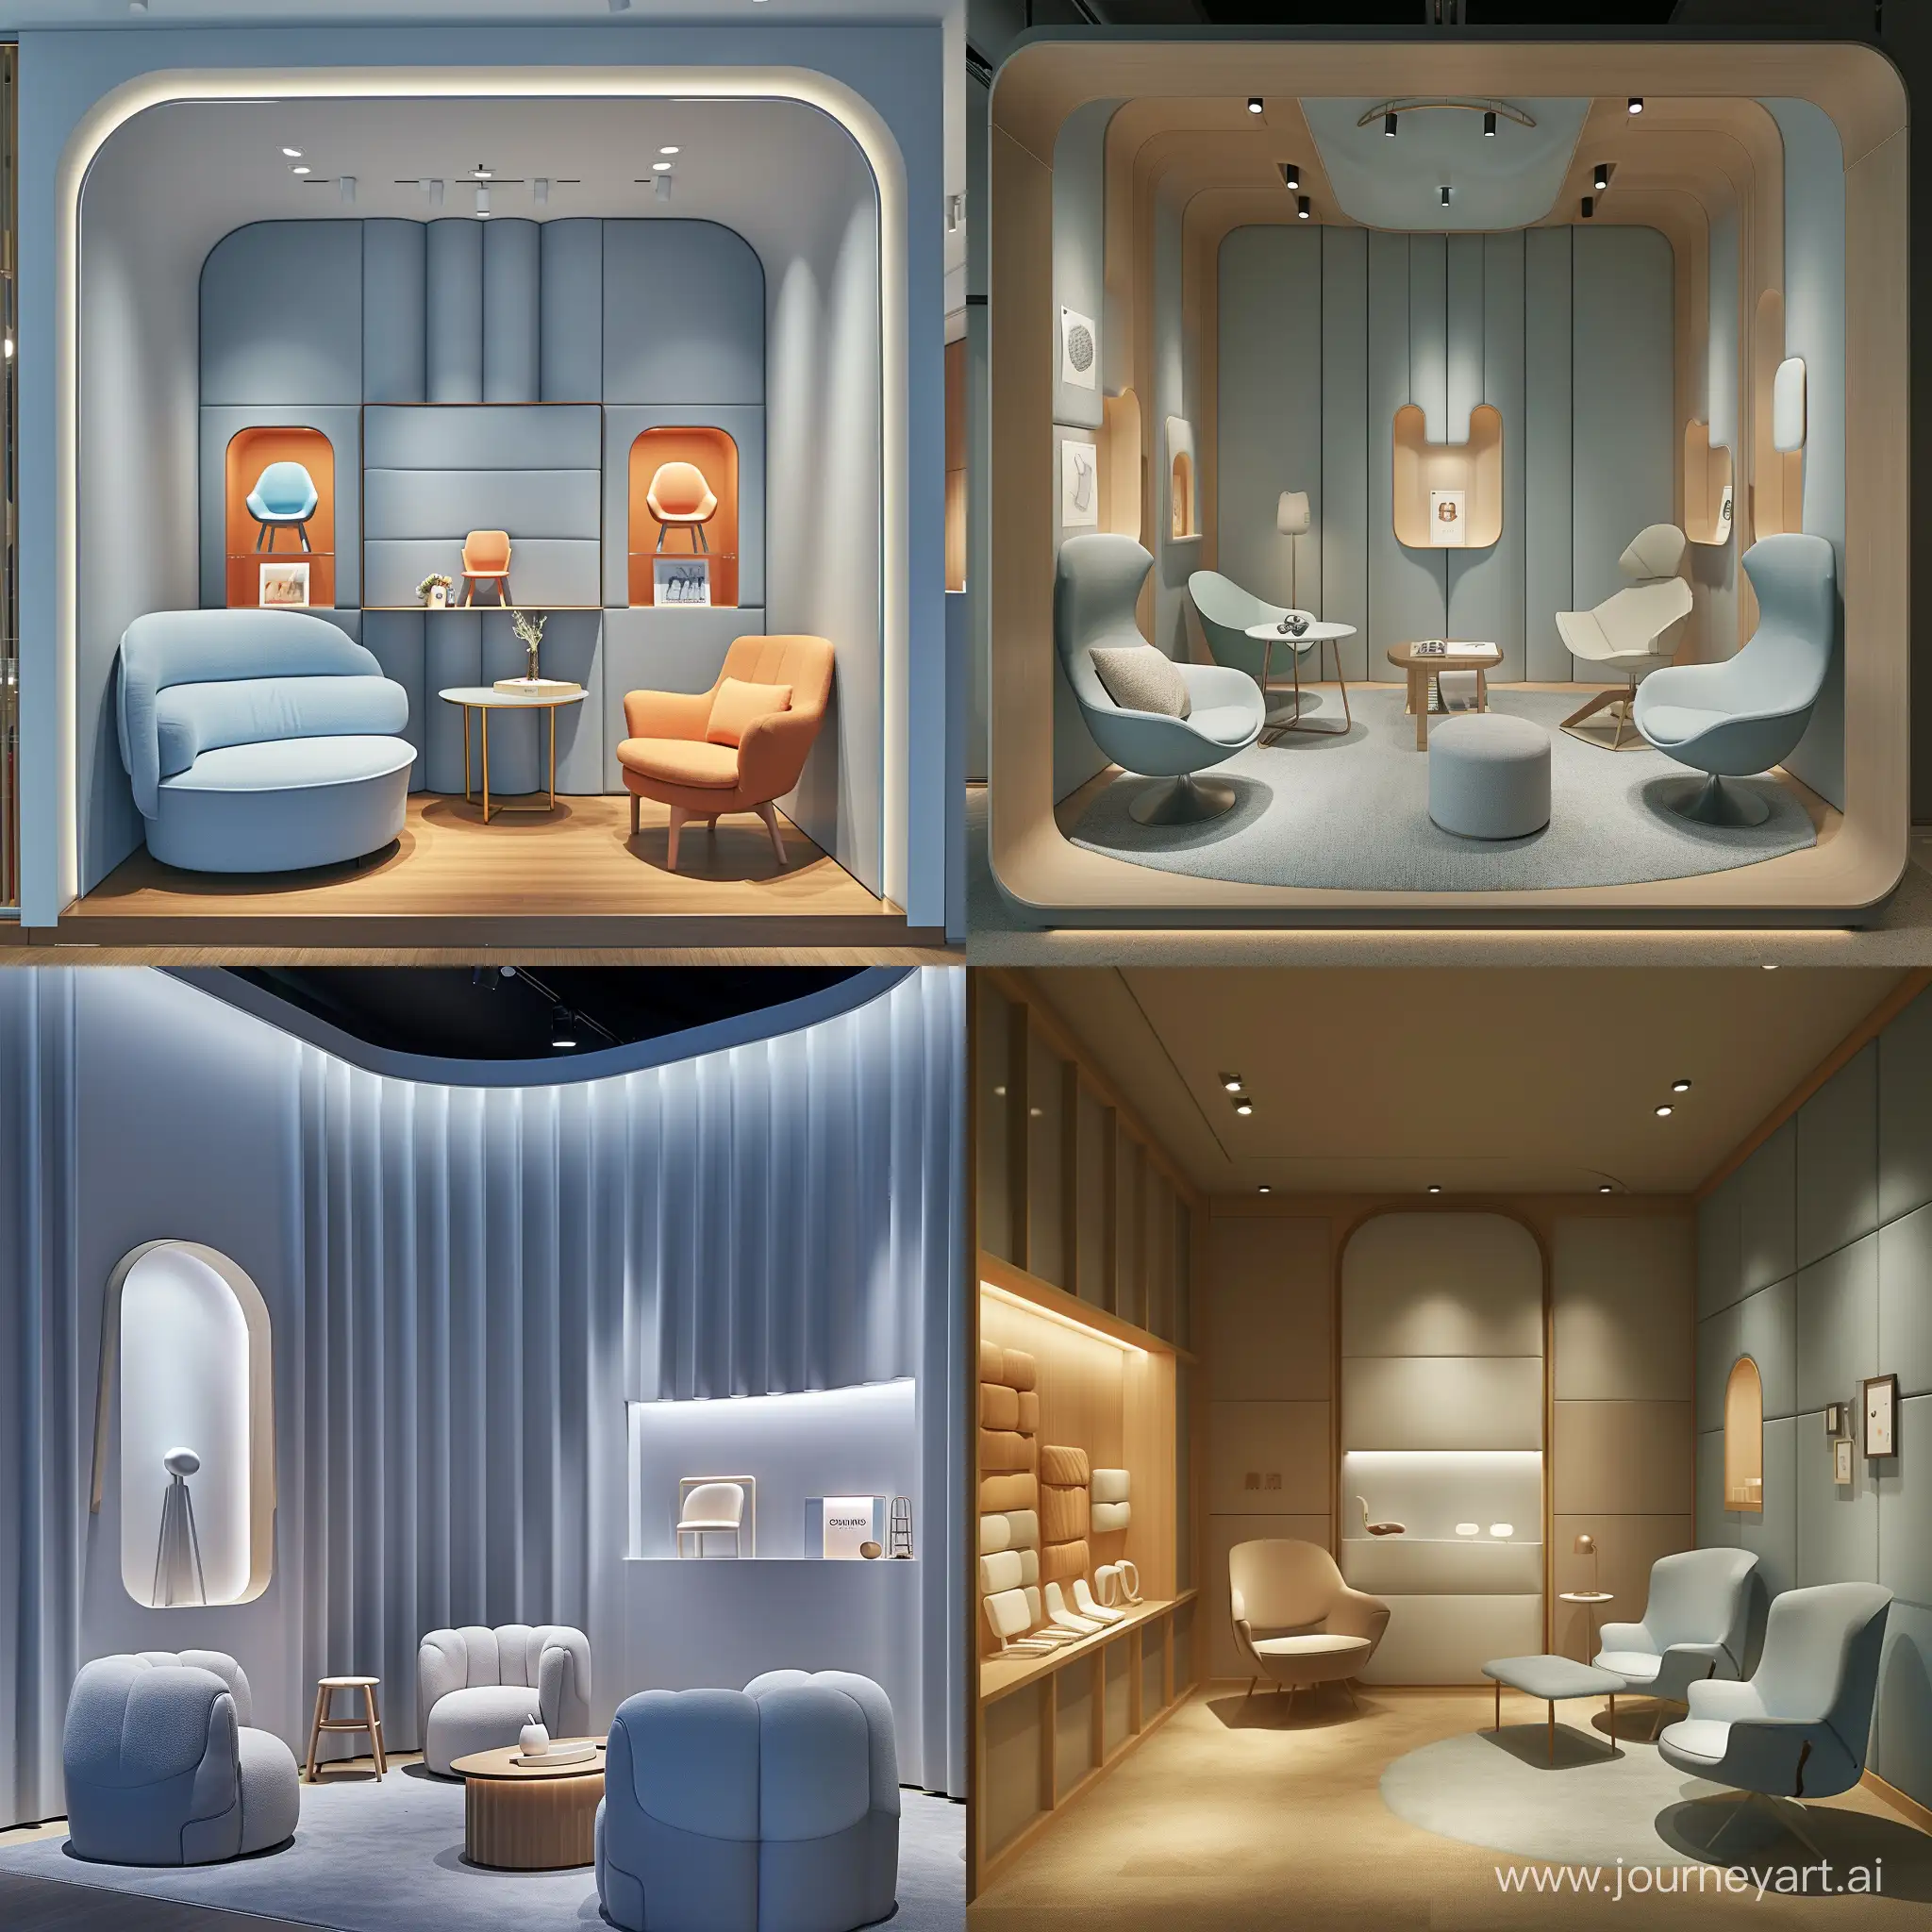 imagine an image of Private Viewing Room (Approx. 6.75 sqm) of kids chair showroom: Color and Material: Calming colors like soft blues or greys; luxurious, sustainable materials for furniture; sound-absorbing wall panels. Items and Elements: Comfortable seating; a display area for private viewing of chairs; perhaps a small table for discussions. Graphic Features: Subtle branding; possibly a display or artwork that reflects the brand's ethos. Lighting: Adjustable lighting, ranging from soft ambient to bright focus lighting for chair examination.realistic style